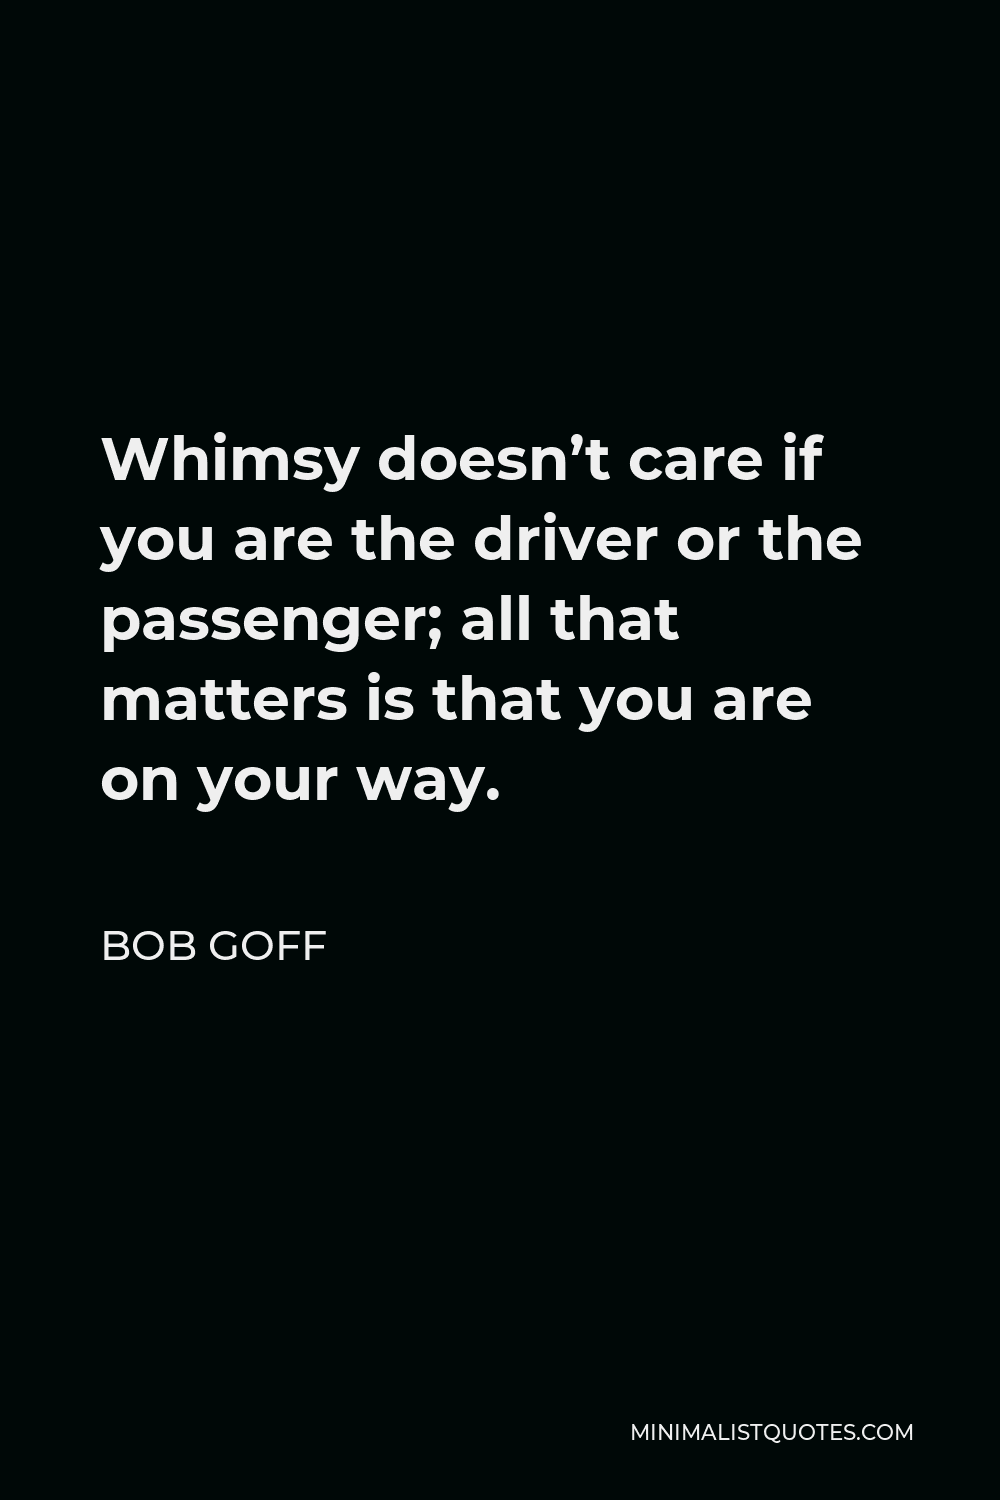 Bob Goff Quote - Whimsy doesn’t care if you are the driver or the passenger; all that matters is that you are on your way.